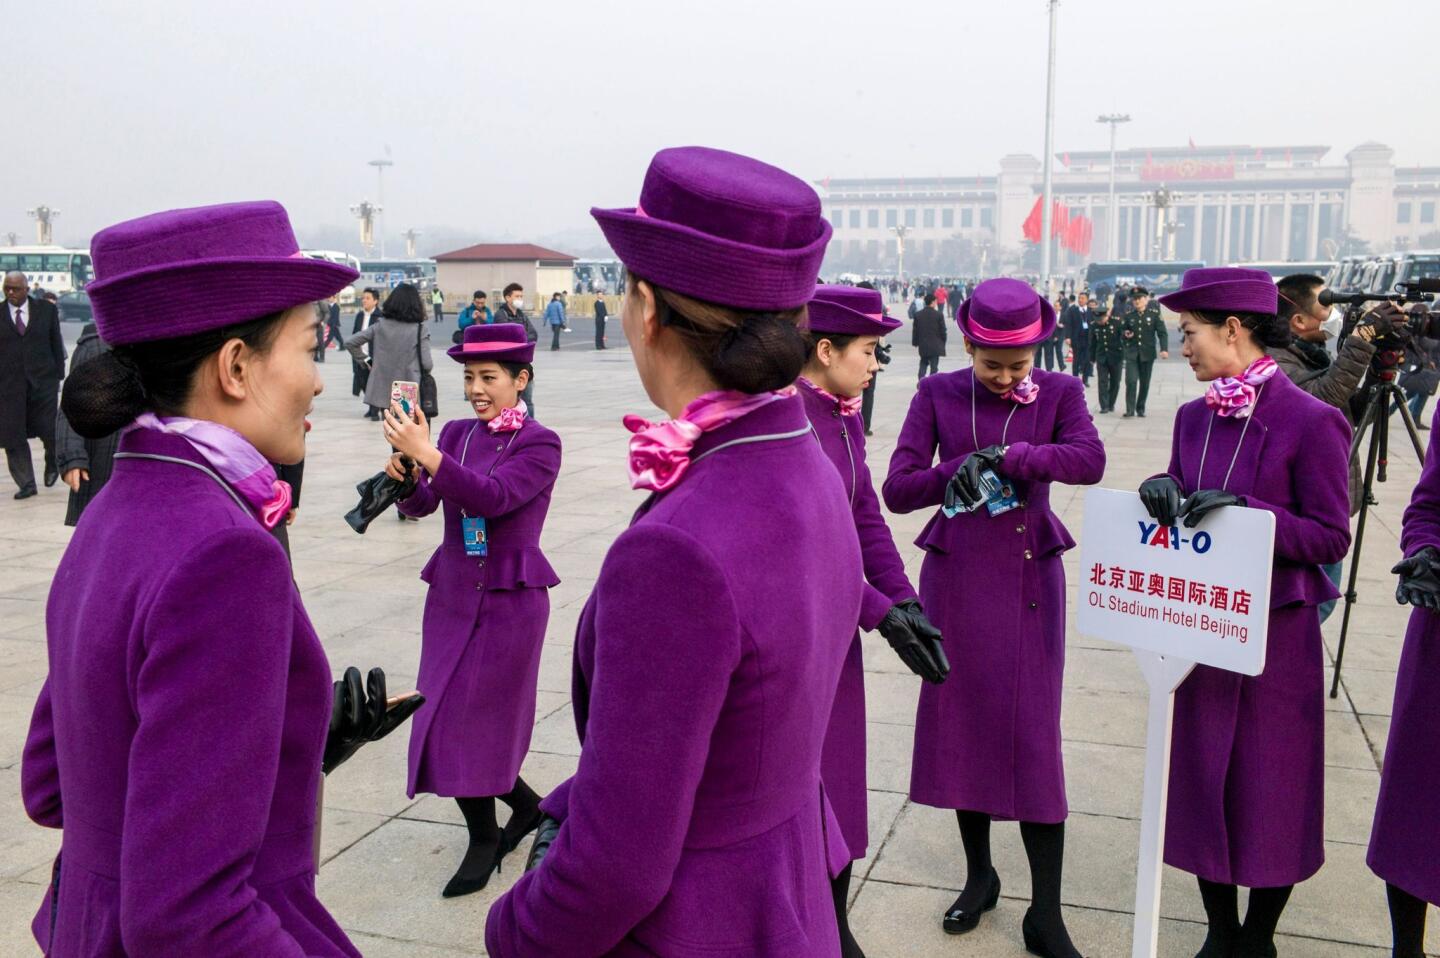 Hostesses take pictures at the opening session of the Chinese People's Political Consultative Conference at the Great Hall of the People in Beijing.